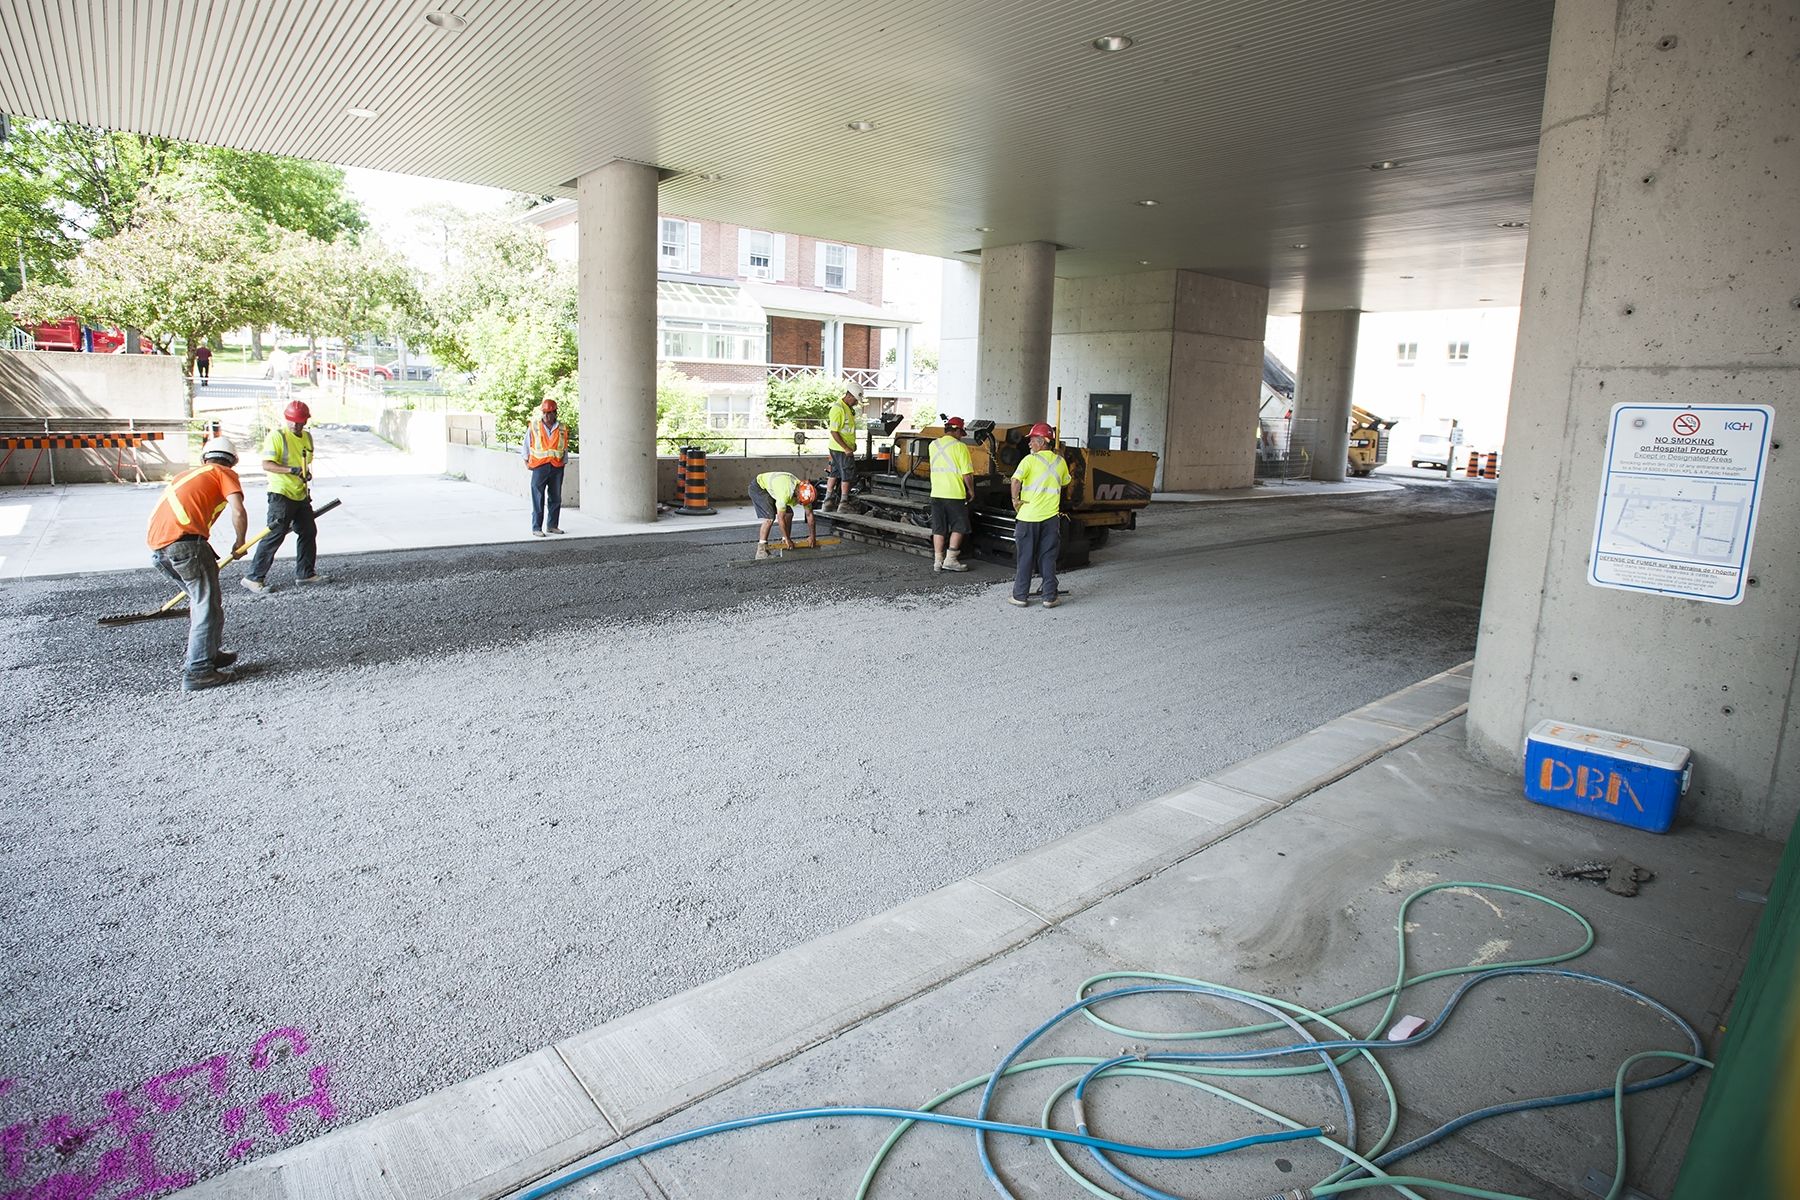 Construction crews prepare to lay asphalt under the front canopy.